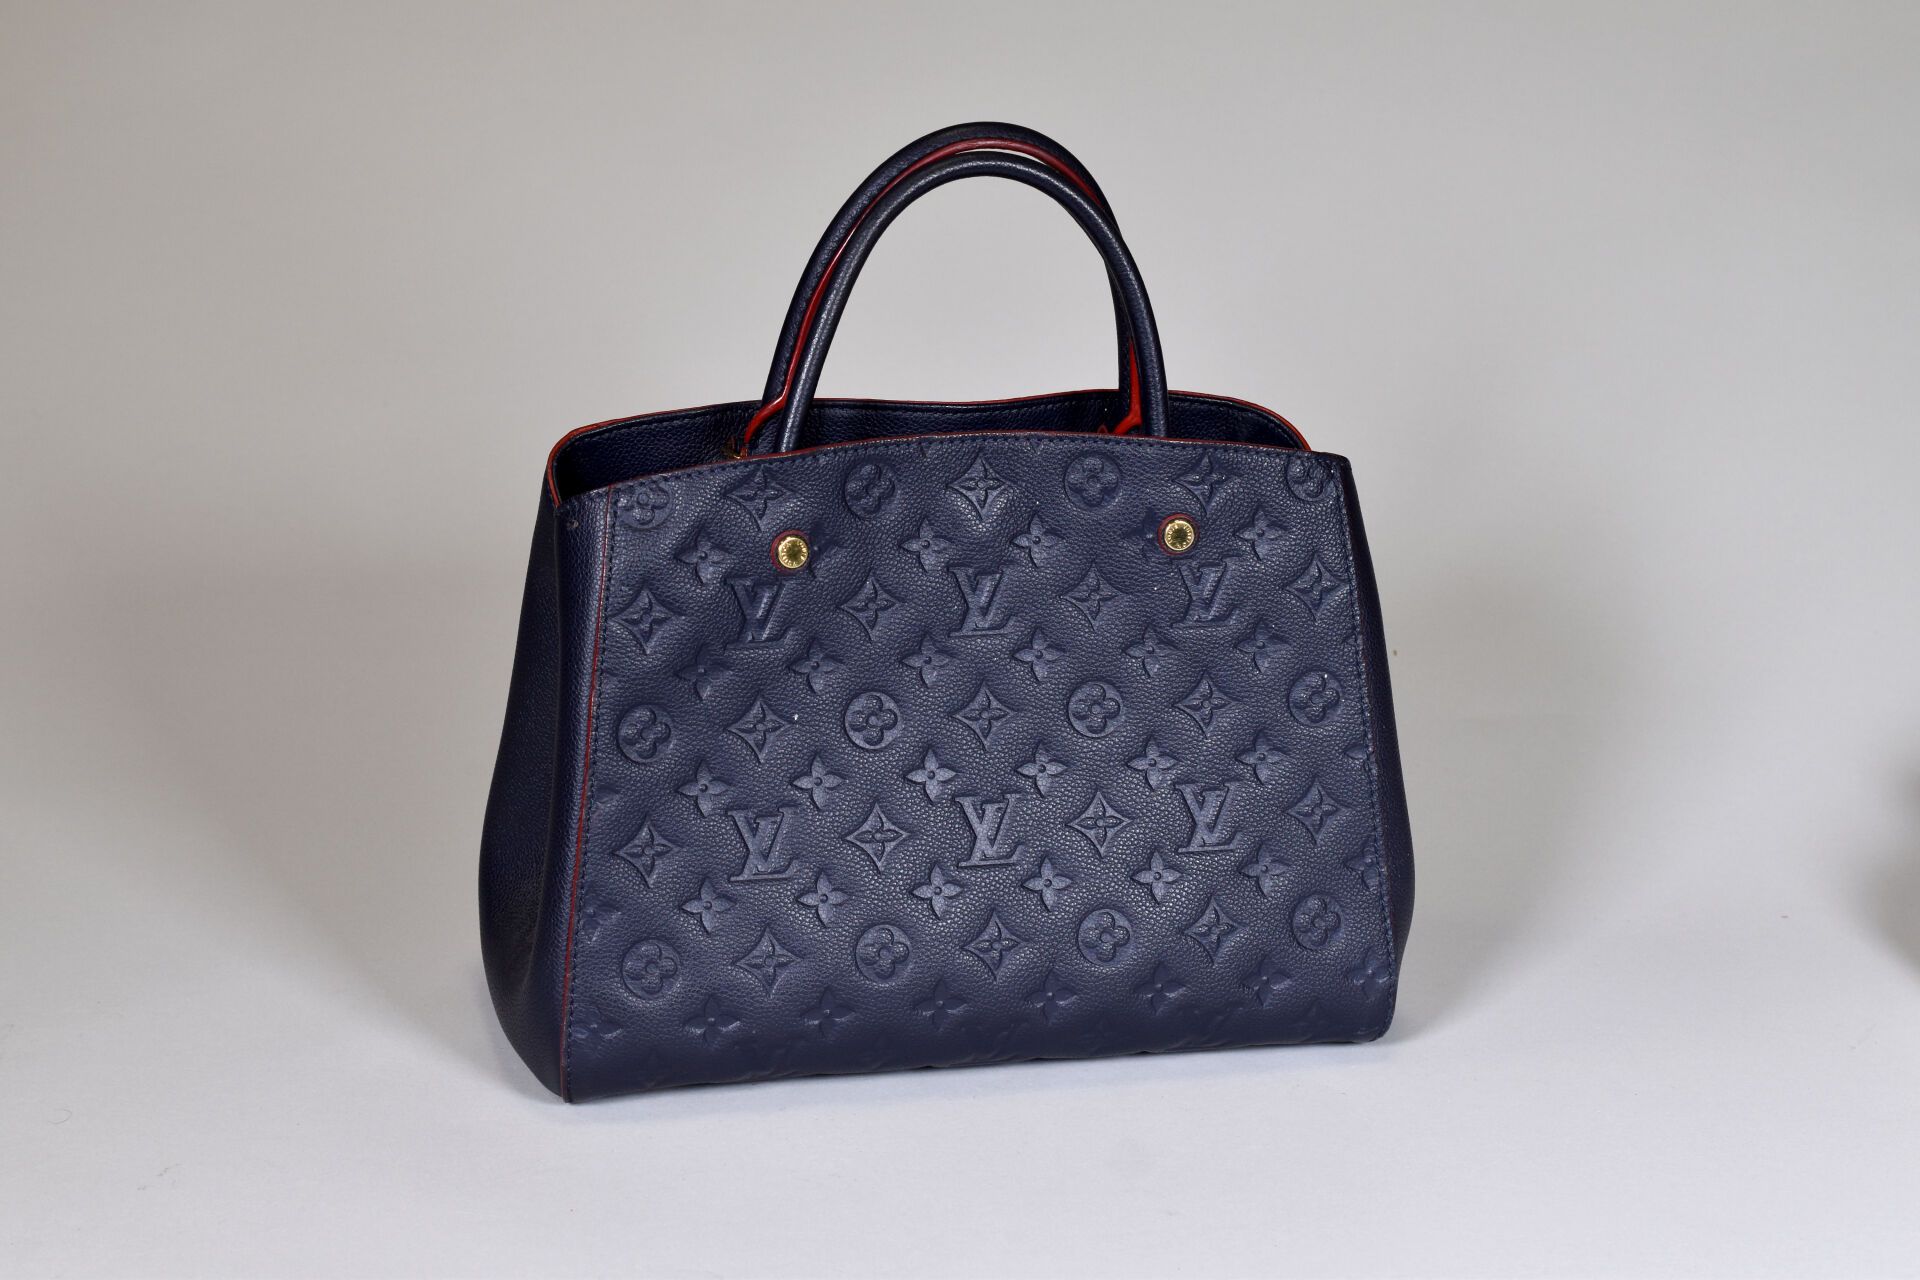 Null LOUIS VUITTON. Montaigne" model handbag in navy leather with red trim. Very&hellip;